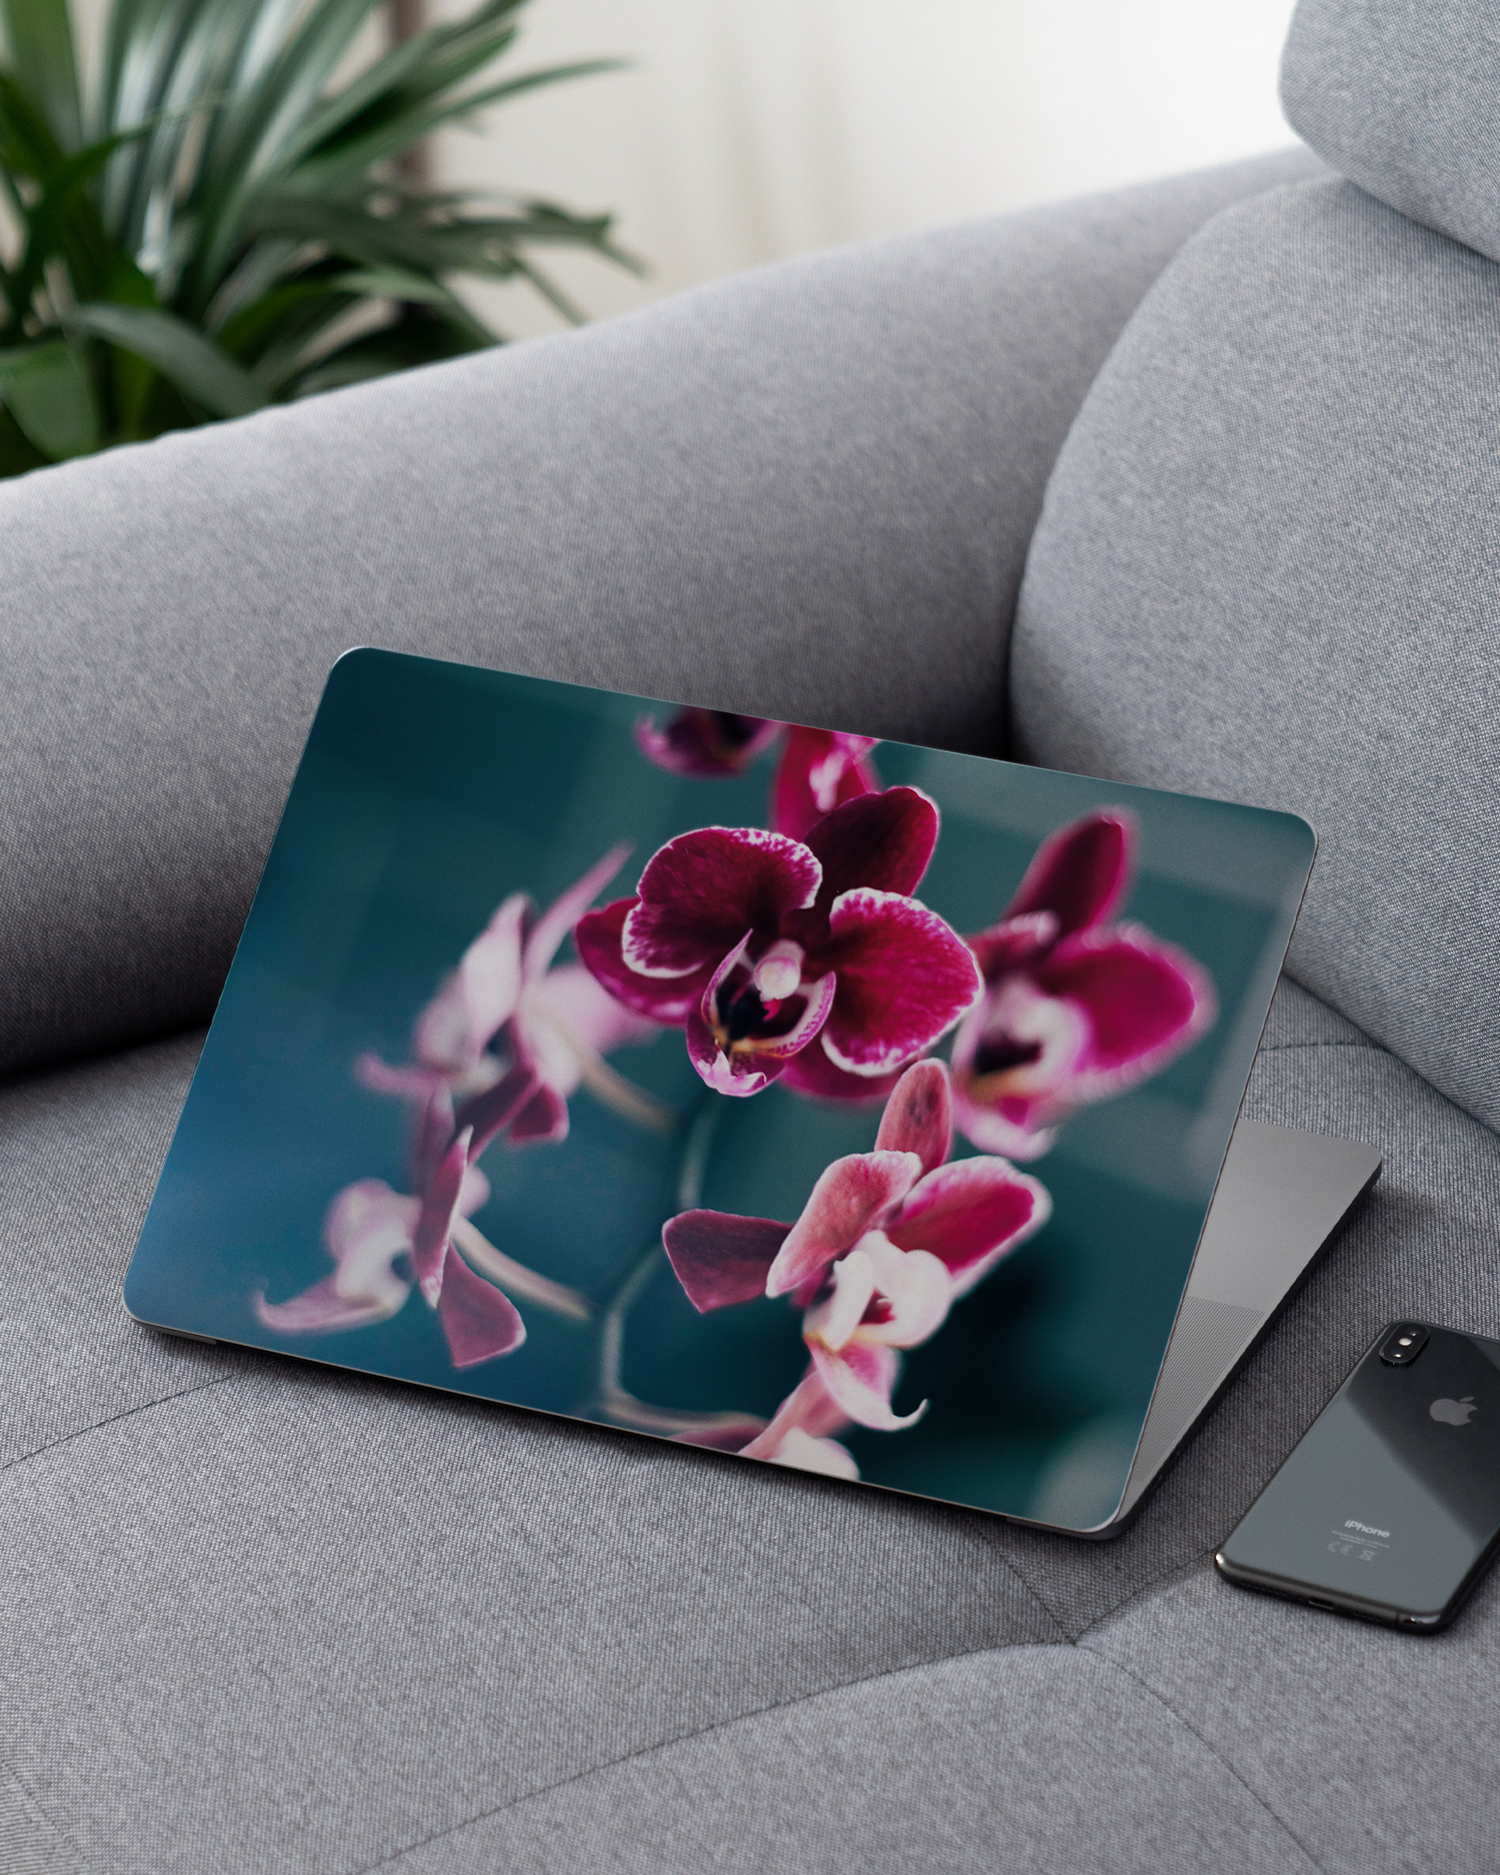 Orchid Laptop Skin for 13 inch Apple MacBooks on a couch